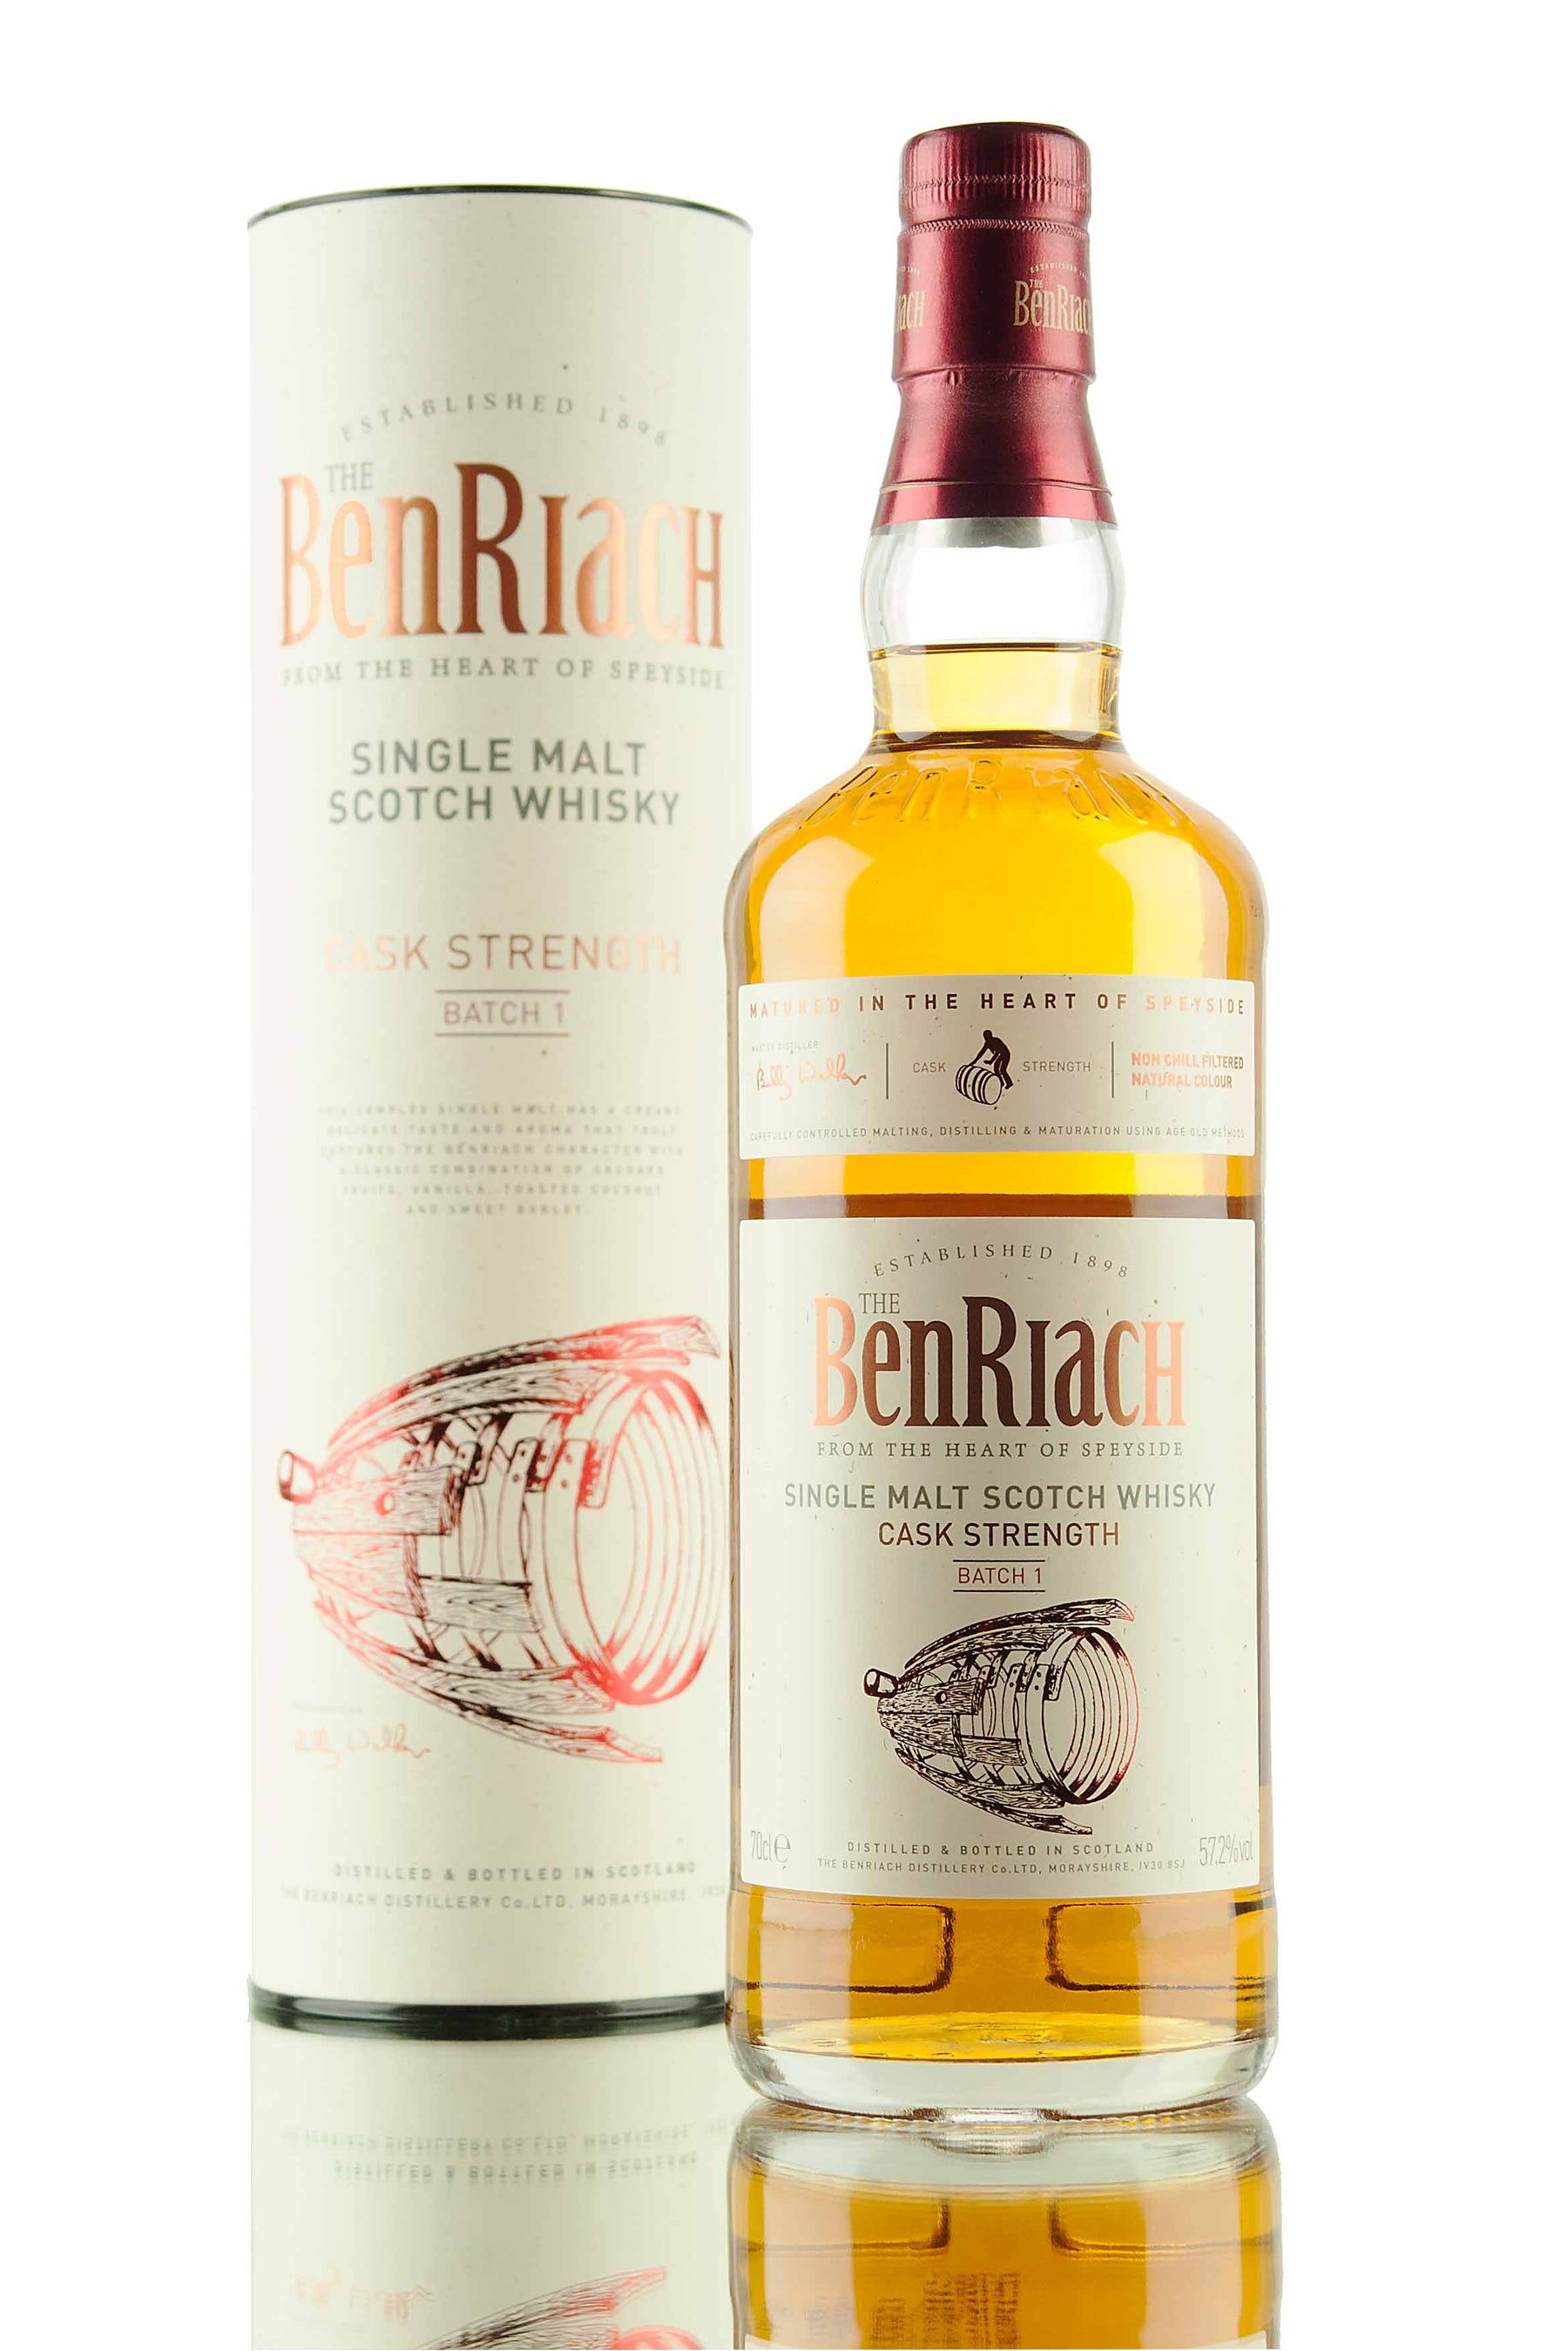 In stock now! - BenRiach Cask Strength Batch 1